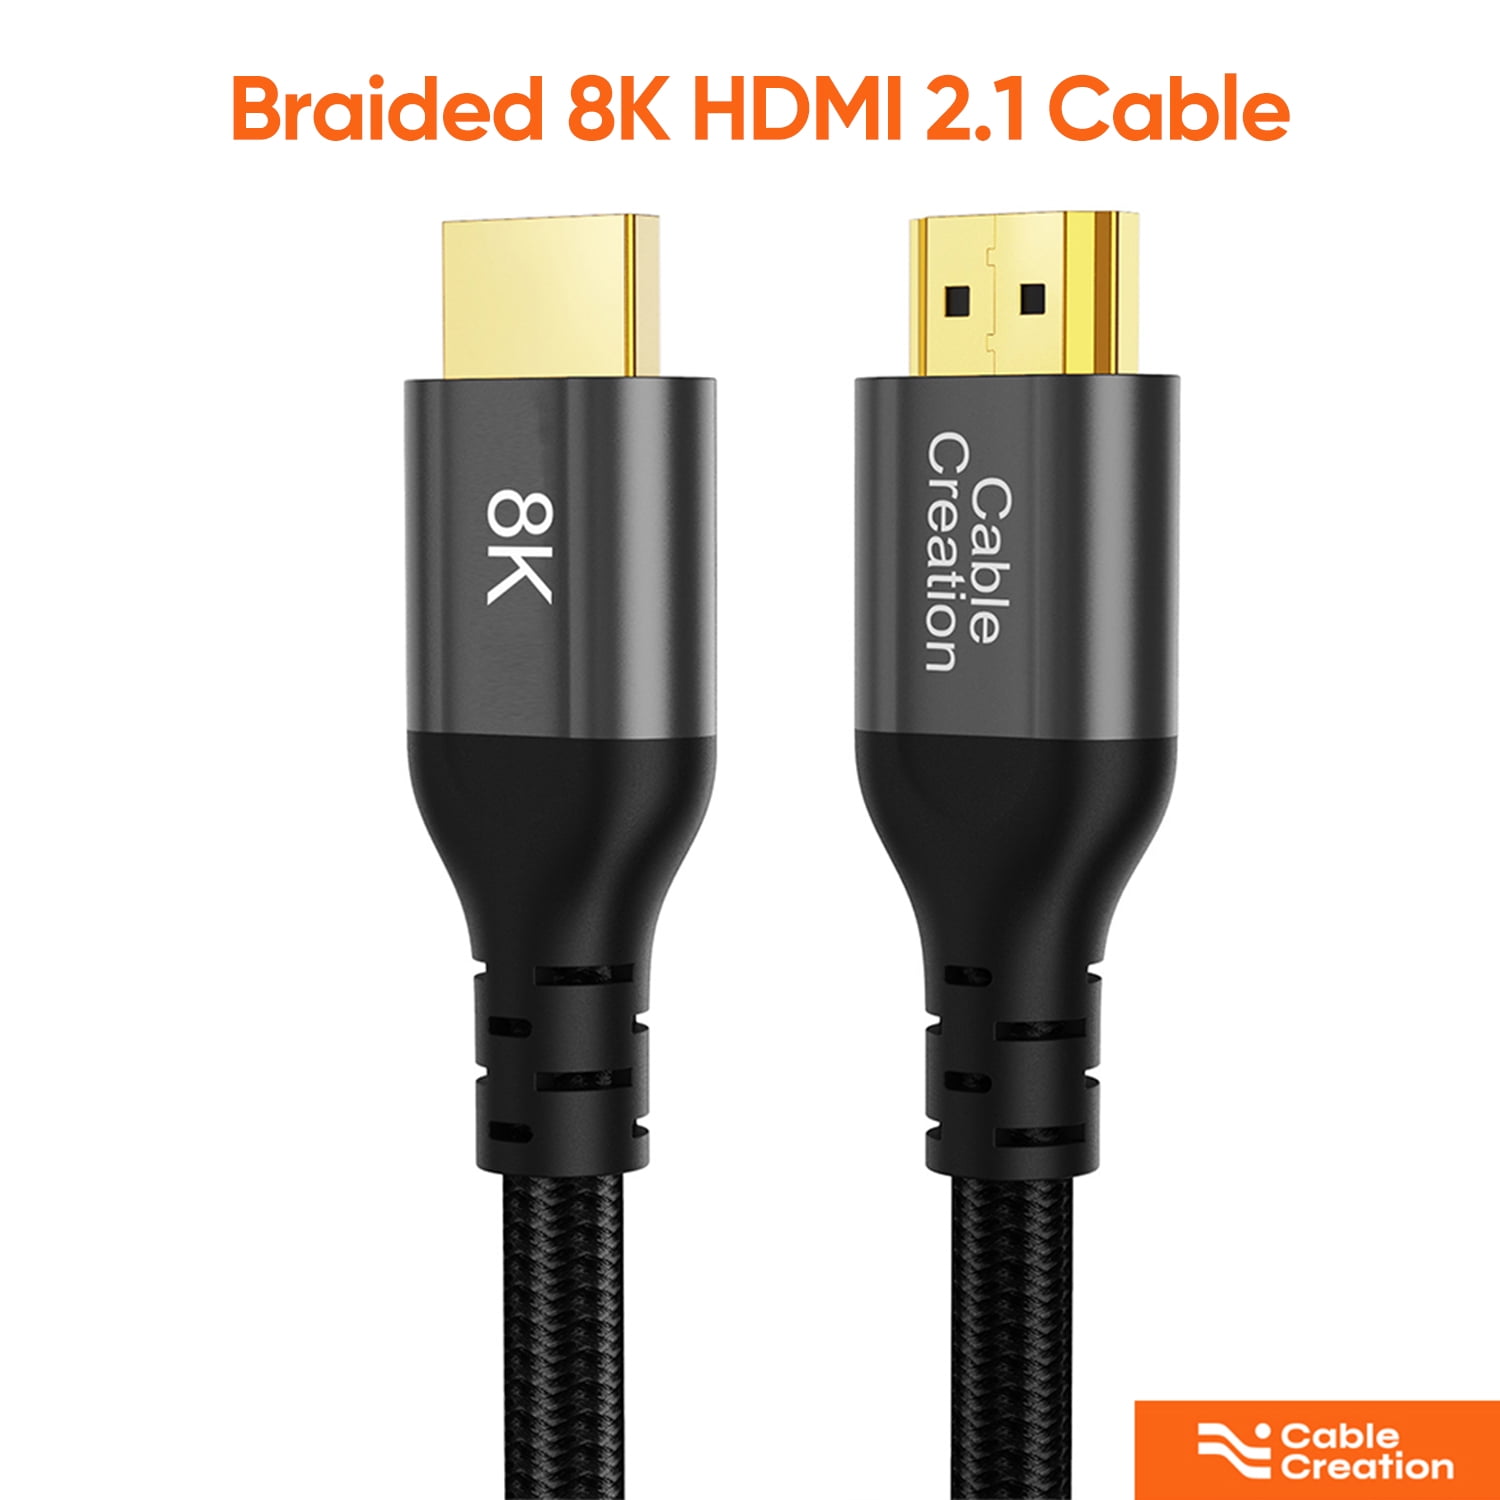 CableCreation 8K HDMI Cable 2.1 Ultra High Speed 48Gbps HDMI HDR Male to Male Cable, Braided HDMI EARC Cord for Apple TV, Roku, Xbox,Samsung, QLED, Sony, LG, Playstation, PS5, PS4 and